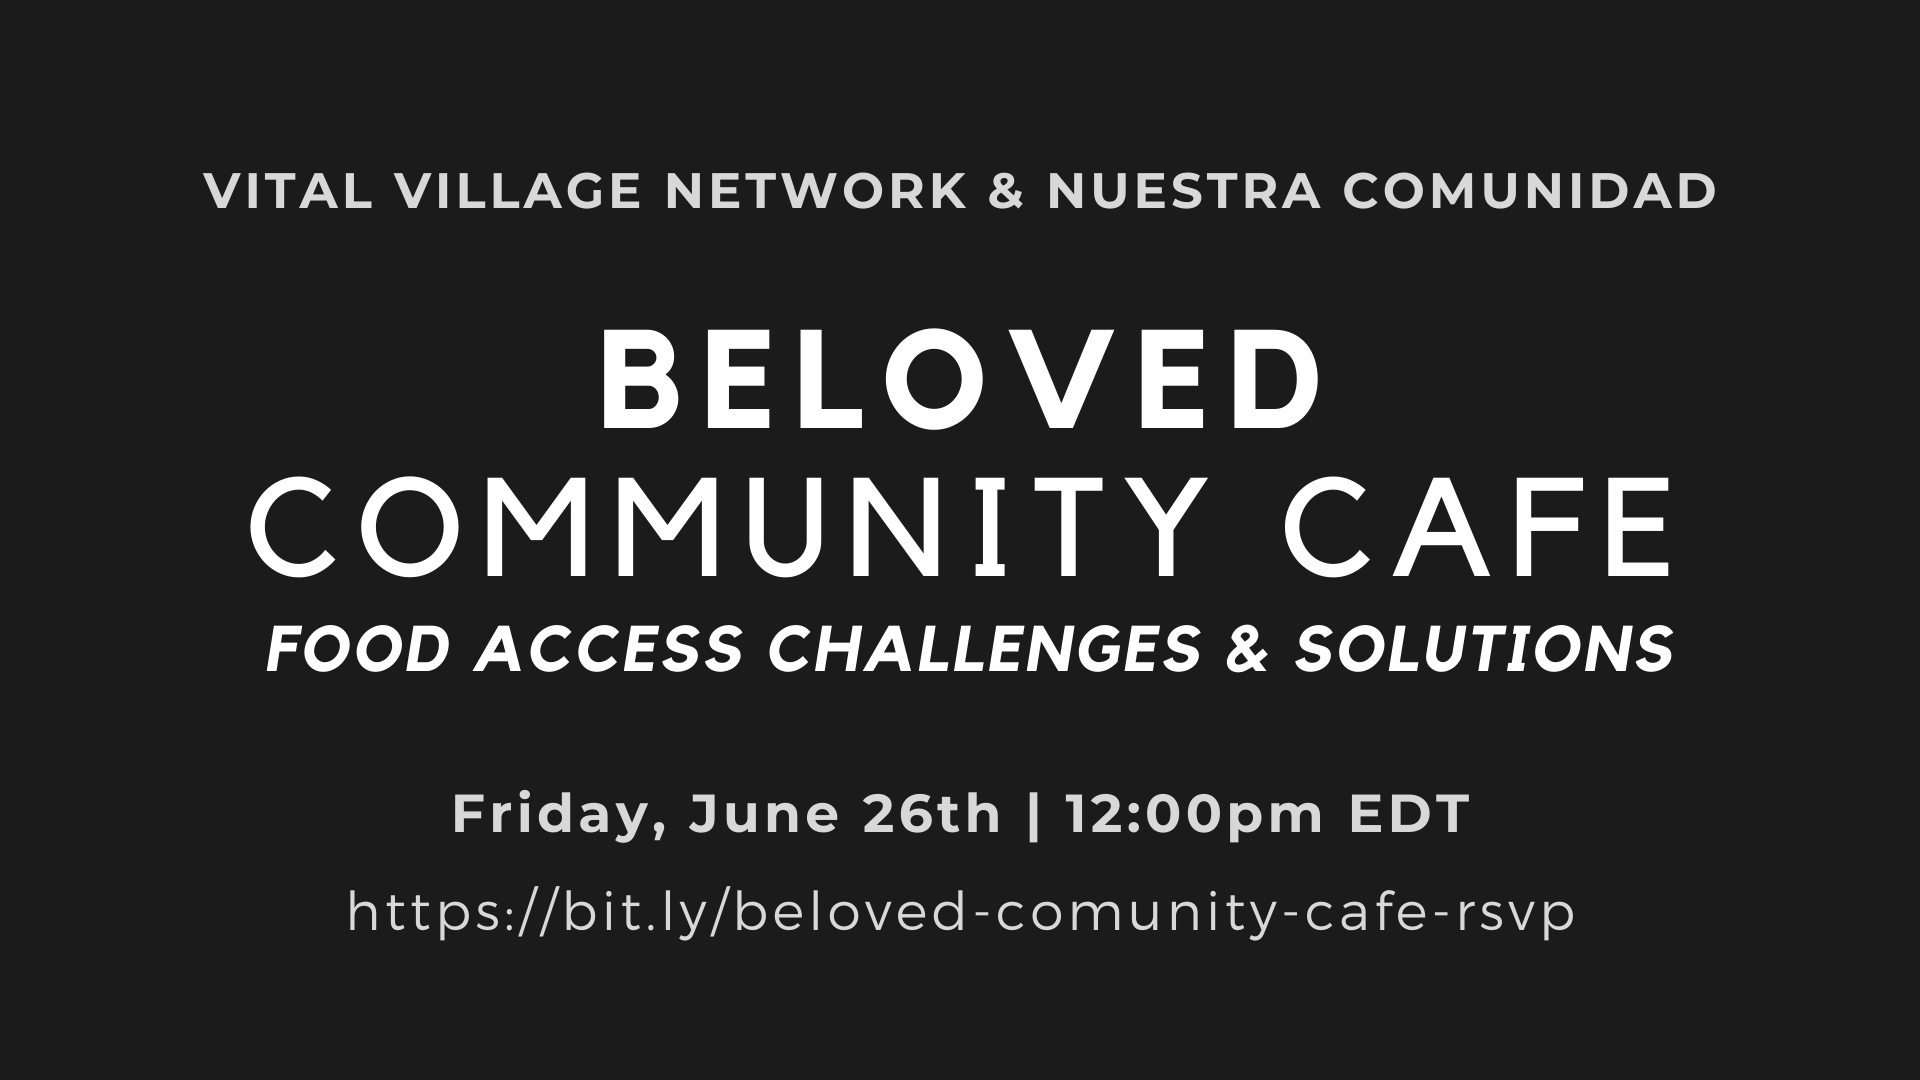 June 26th Beloved Community Cafe: Food Access Challenges & Solutions